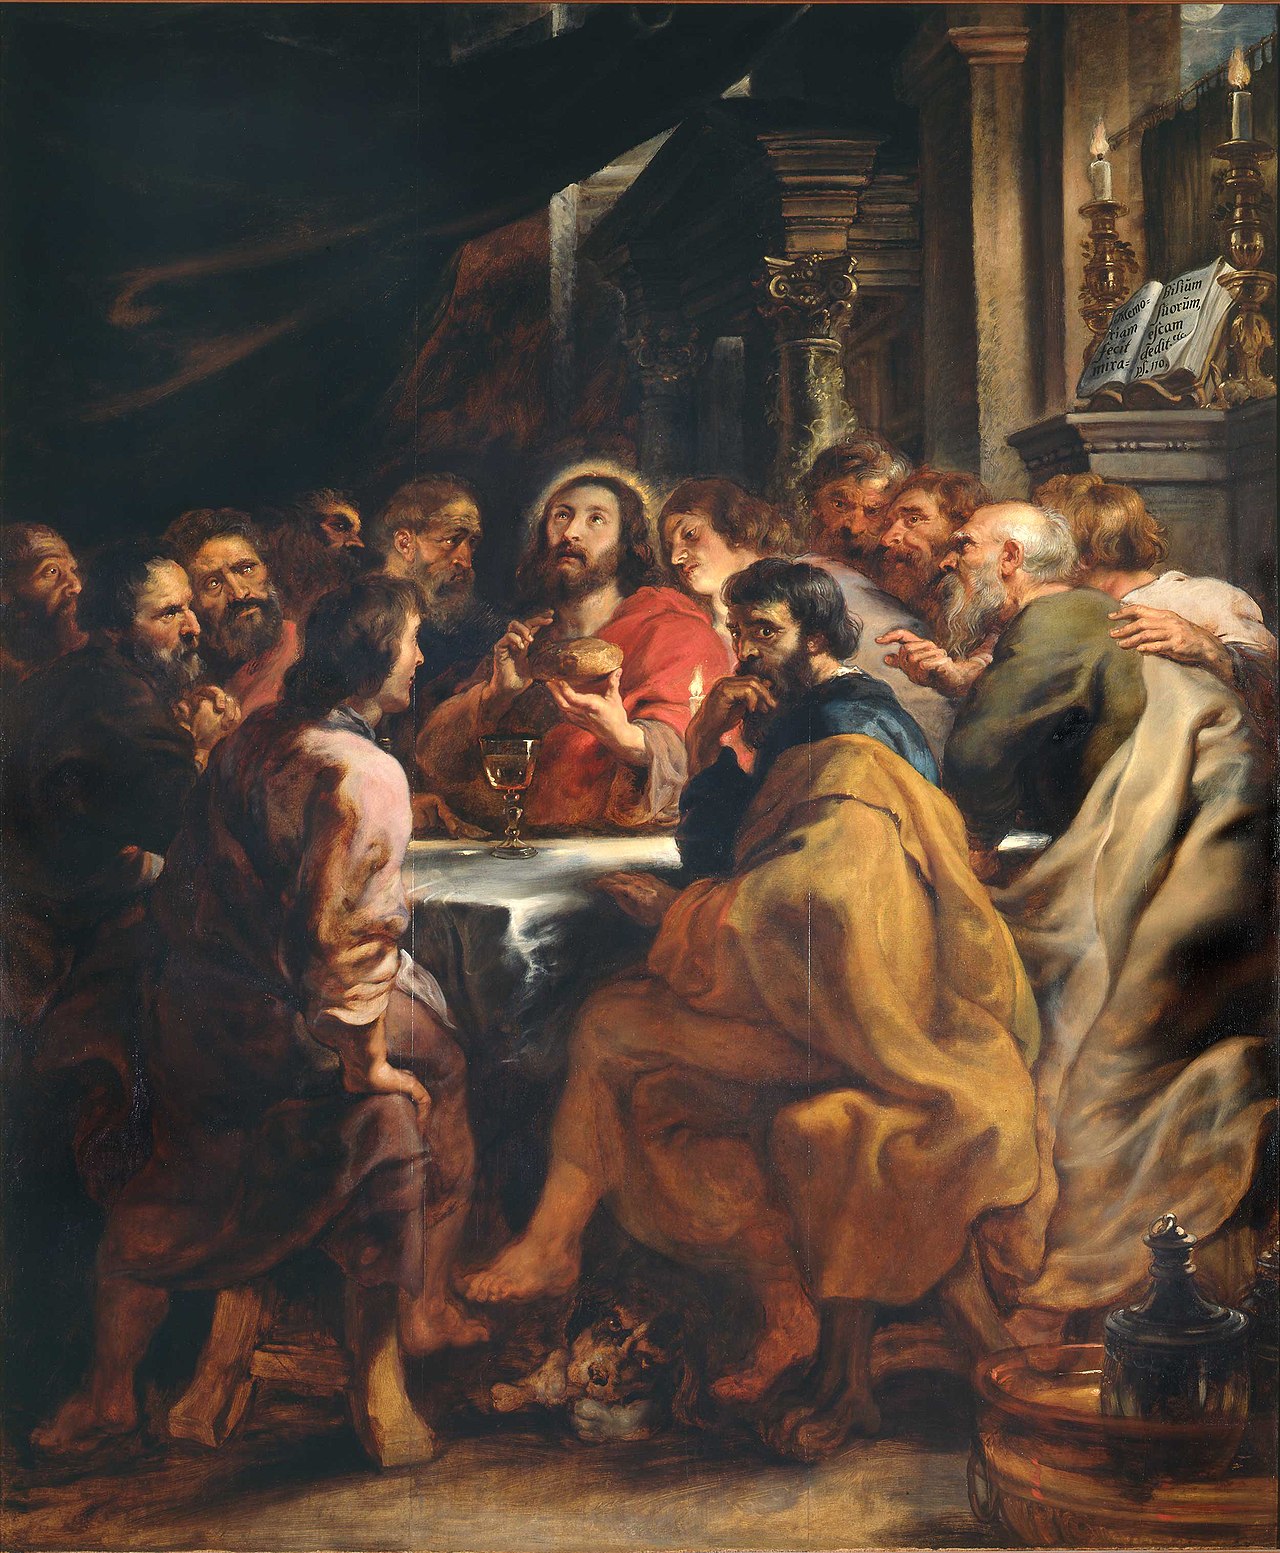 The Art of the Luminous Mysteries: The Last Supper